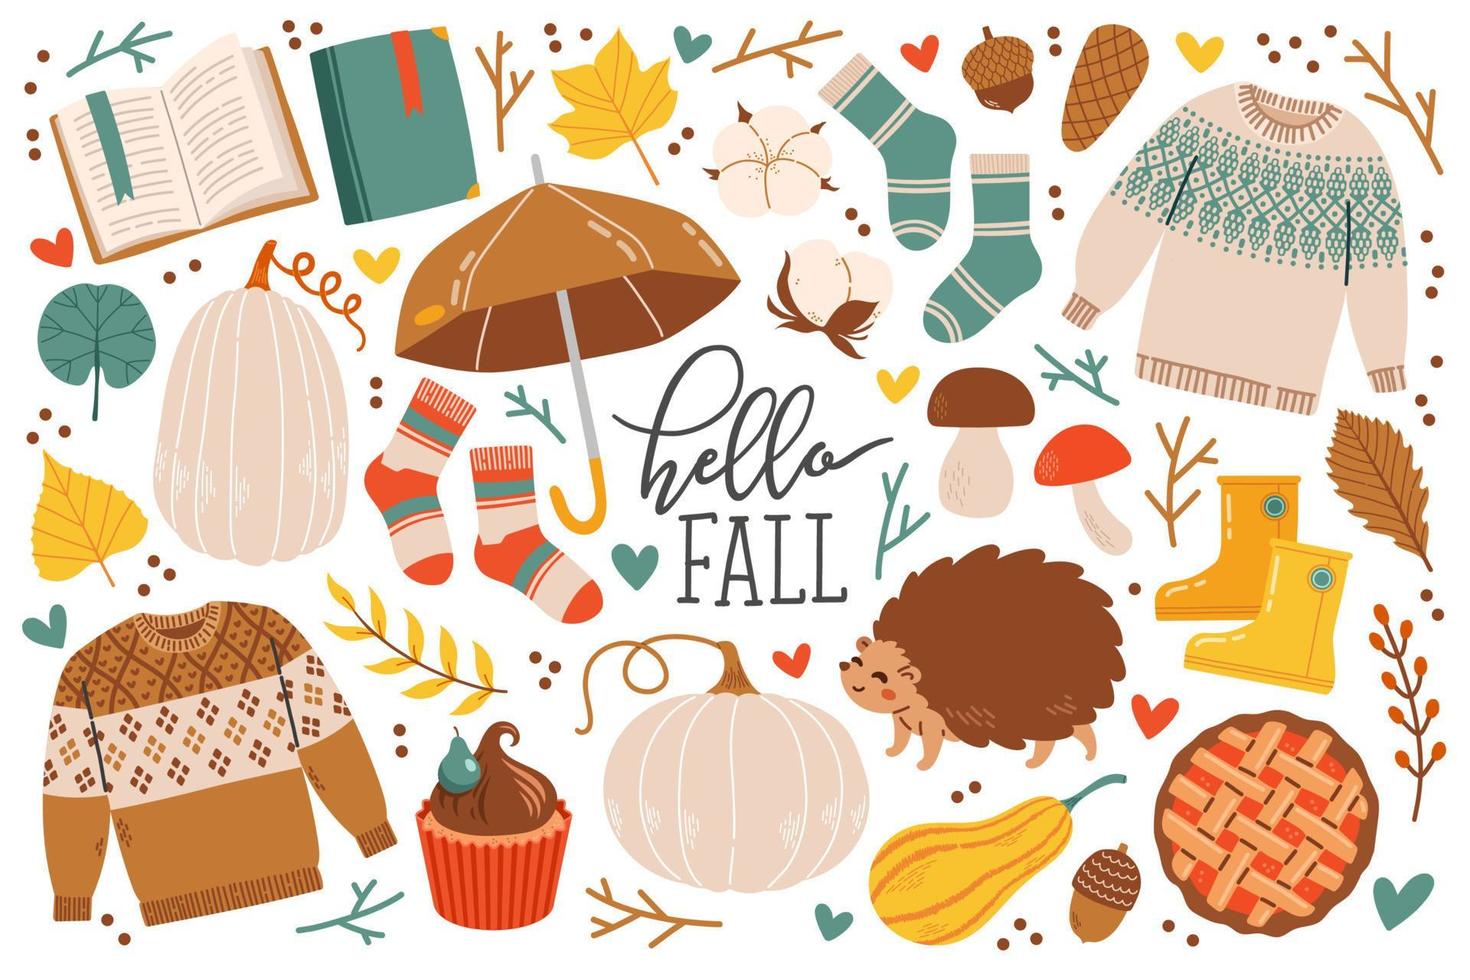 Autumn icons set falling leaves, pumpkins, sweater, cute animals, socks, floral wreath. Fall season elements perfect for scrapbook, card, poster, invitation, sticker kit. Vector illustration.